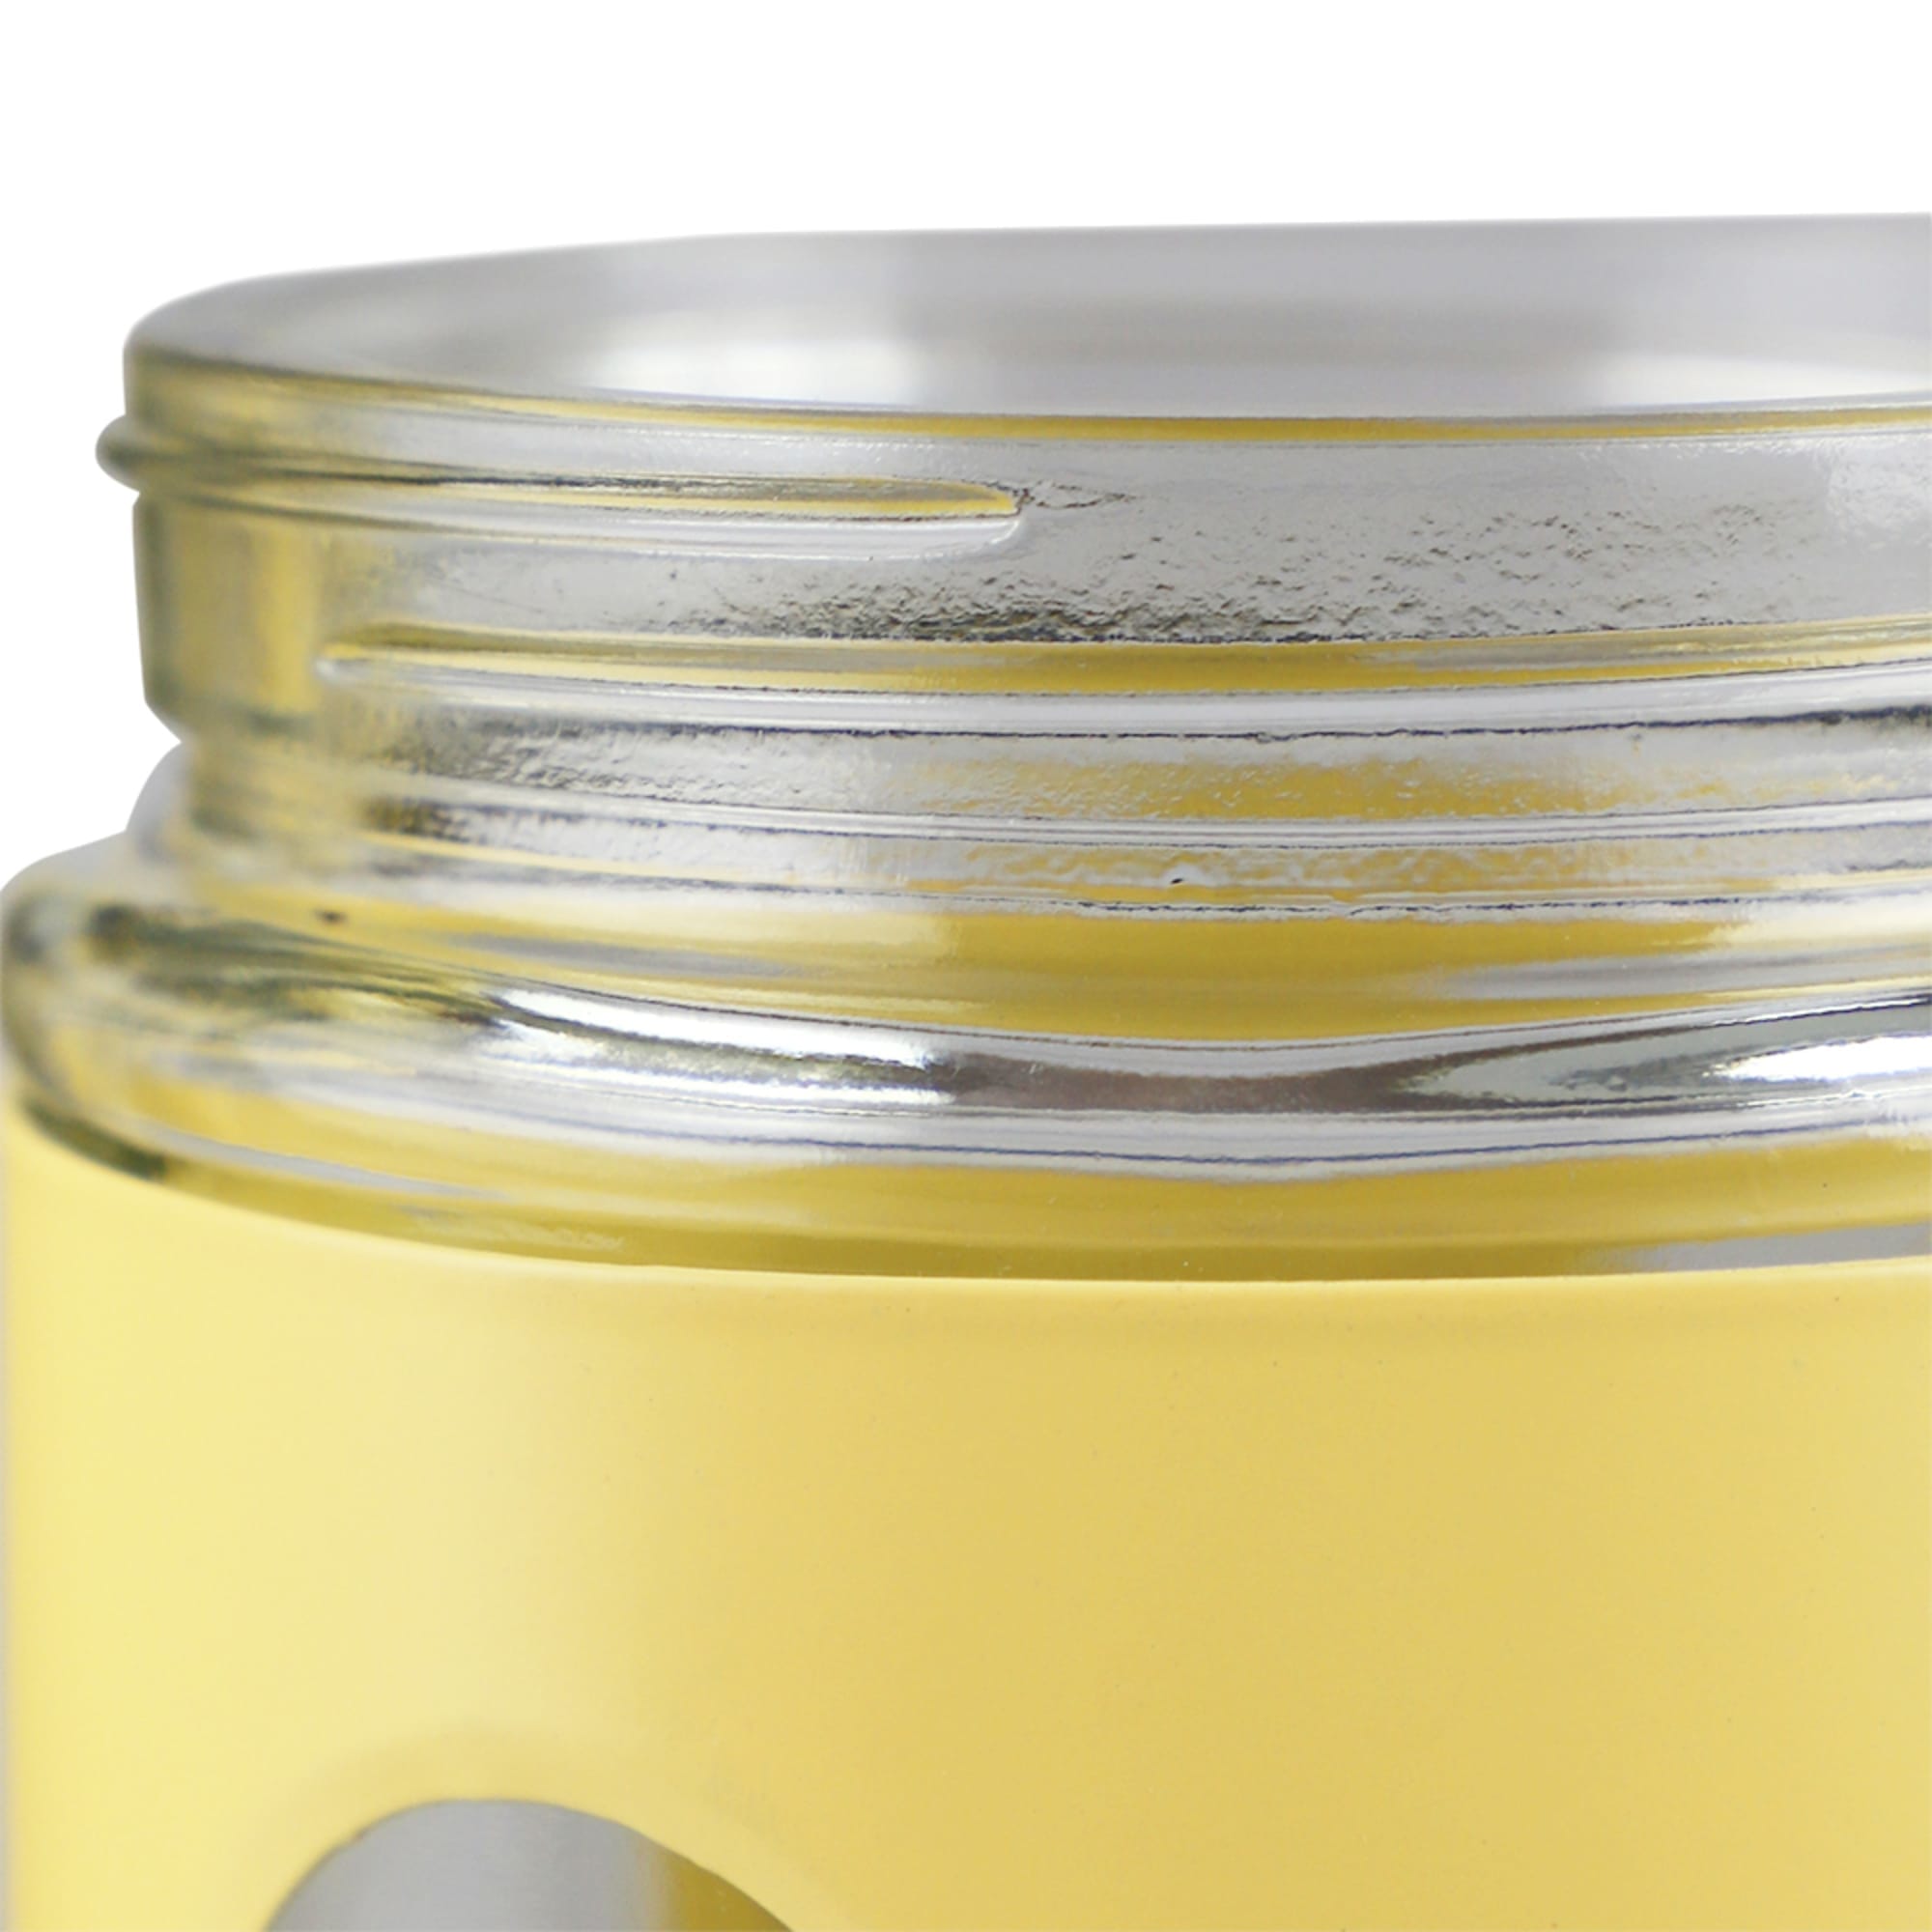 Home Basics 4 Piece Stainless Steel Canisters with Multiple Peek-Through Windows, Yellow $15.00 EACH, CASE PACK OF 4